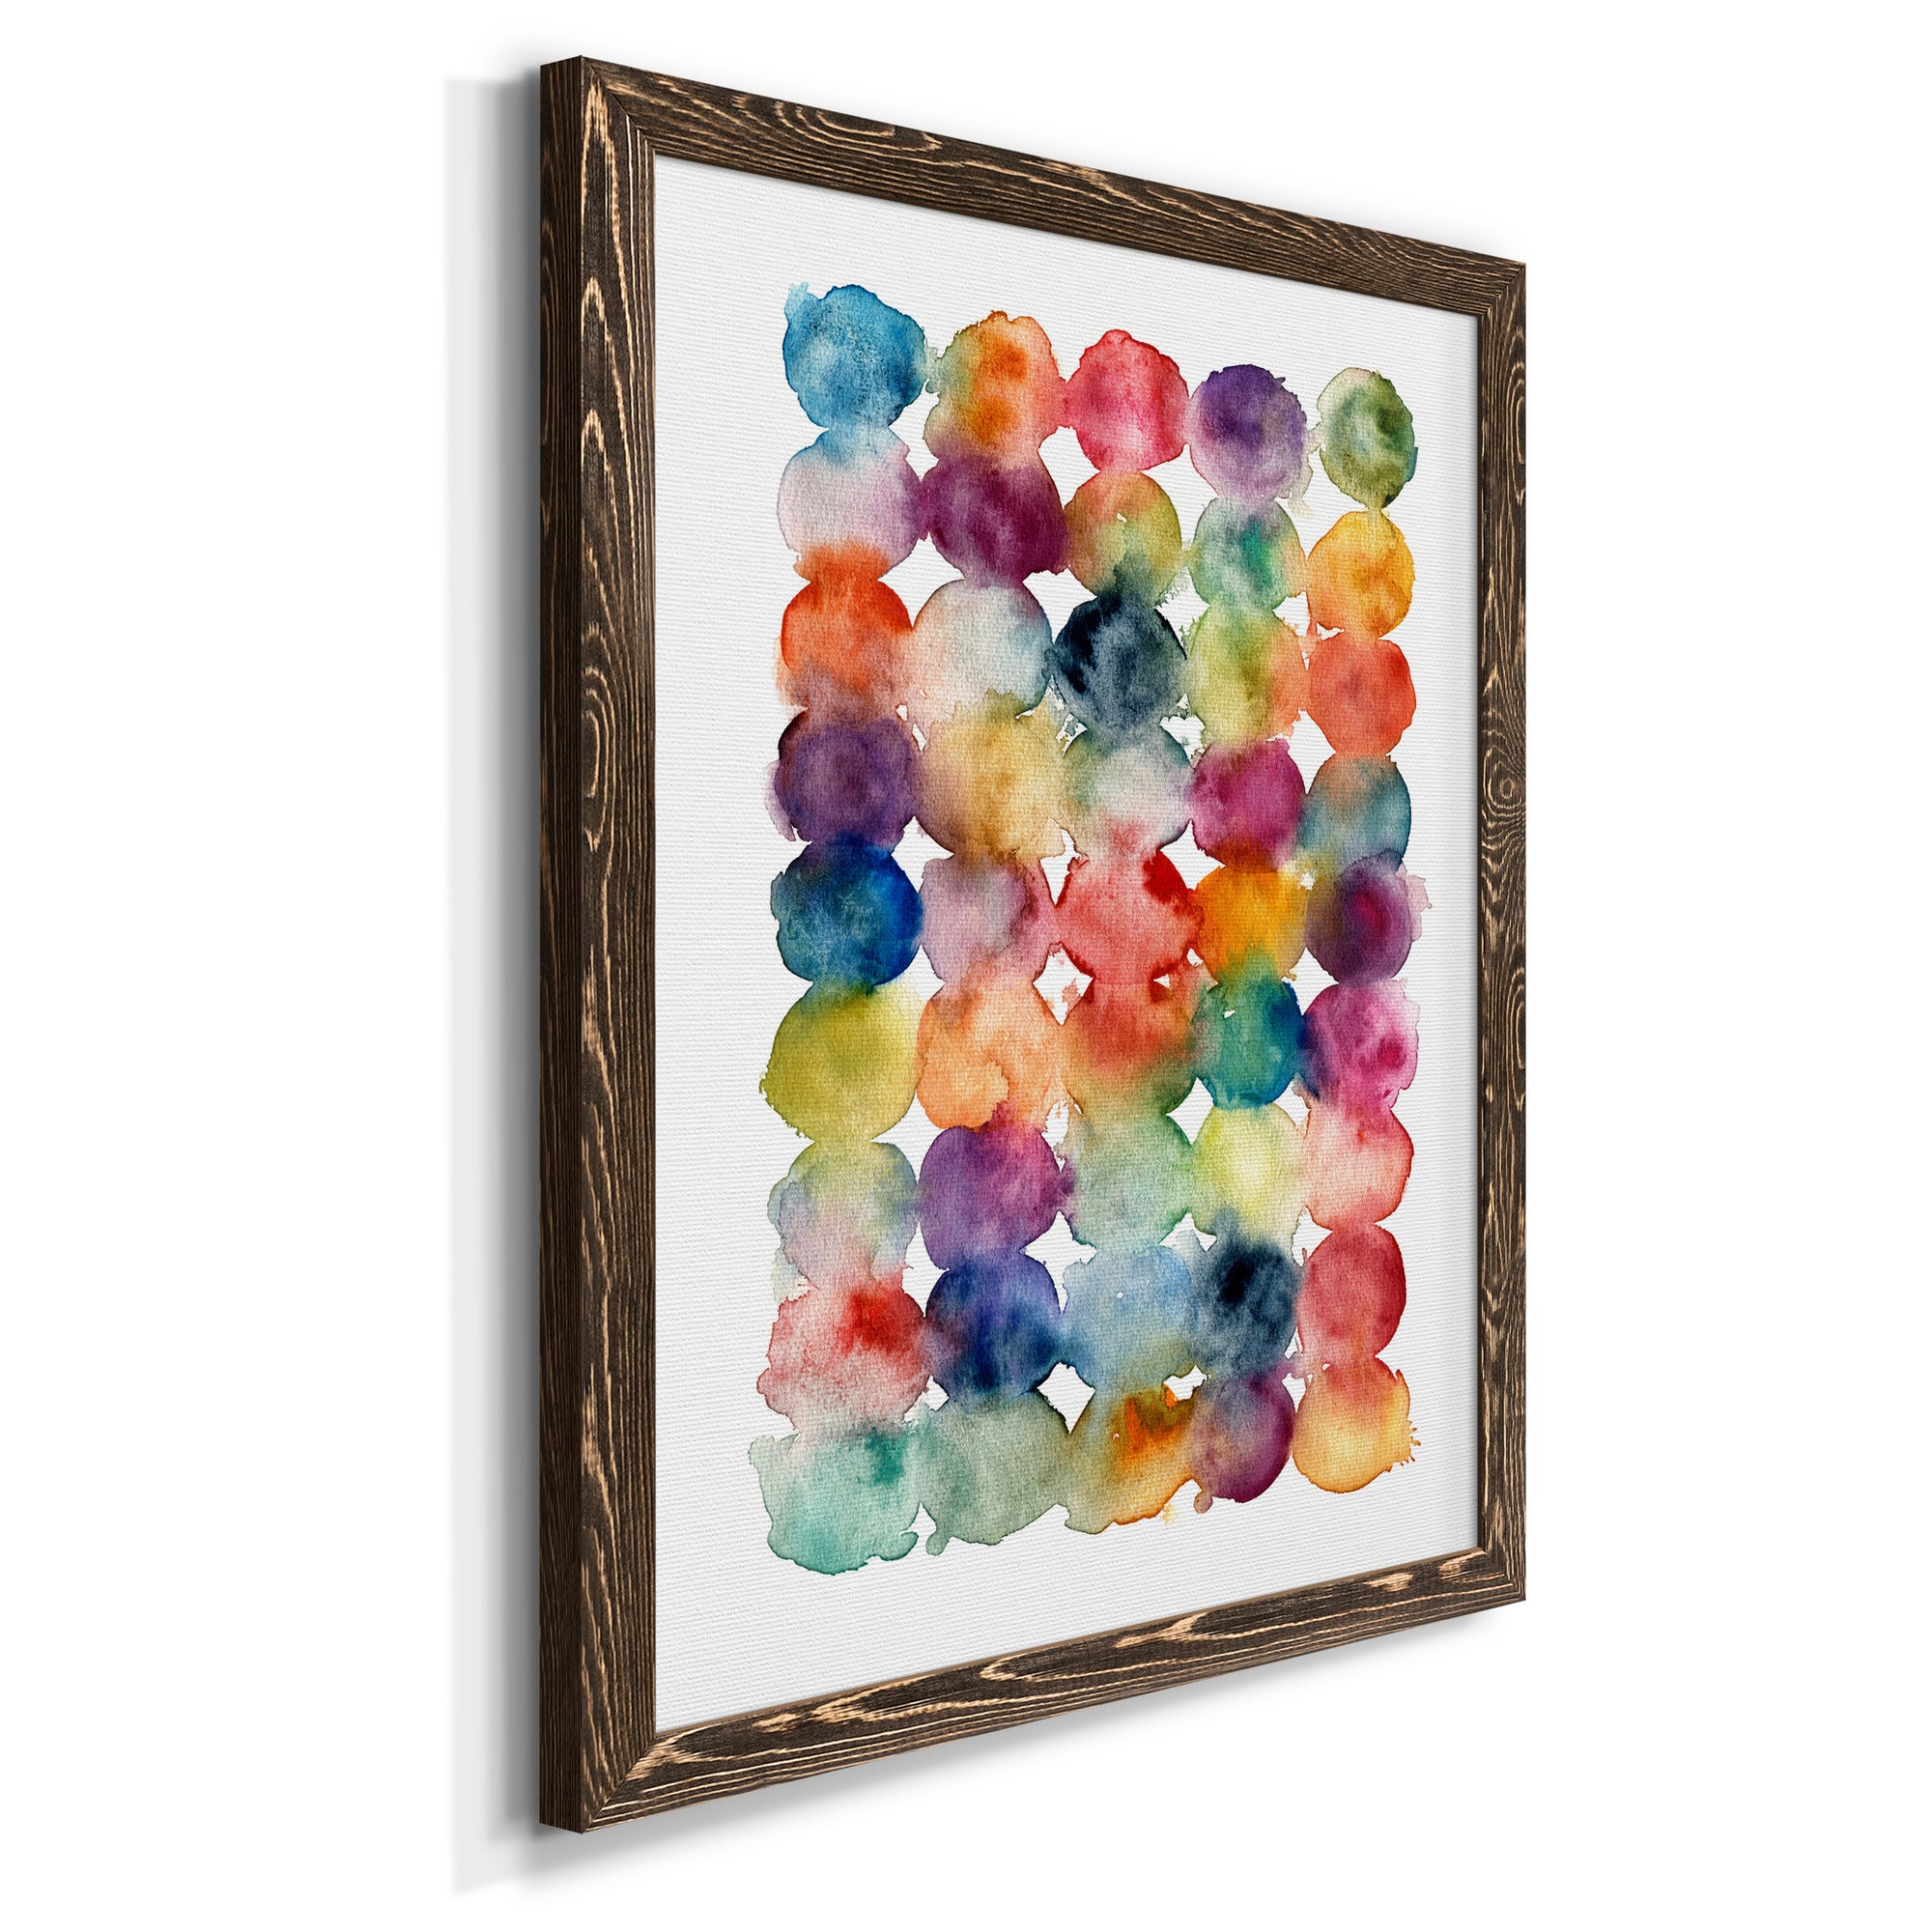 Spectrum Side by Side - Premium Canvas Framed in Barnwood - Ready to Hang